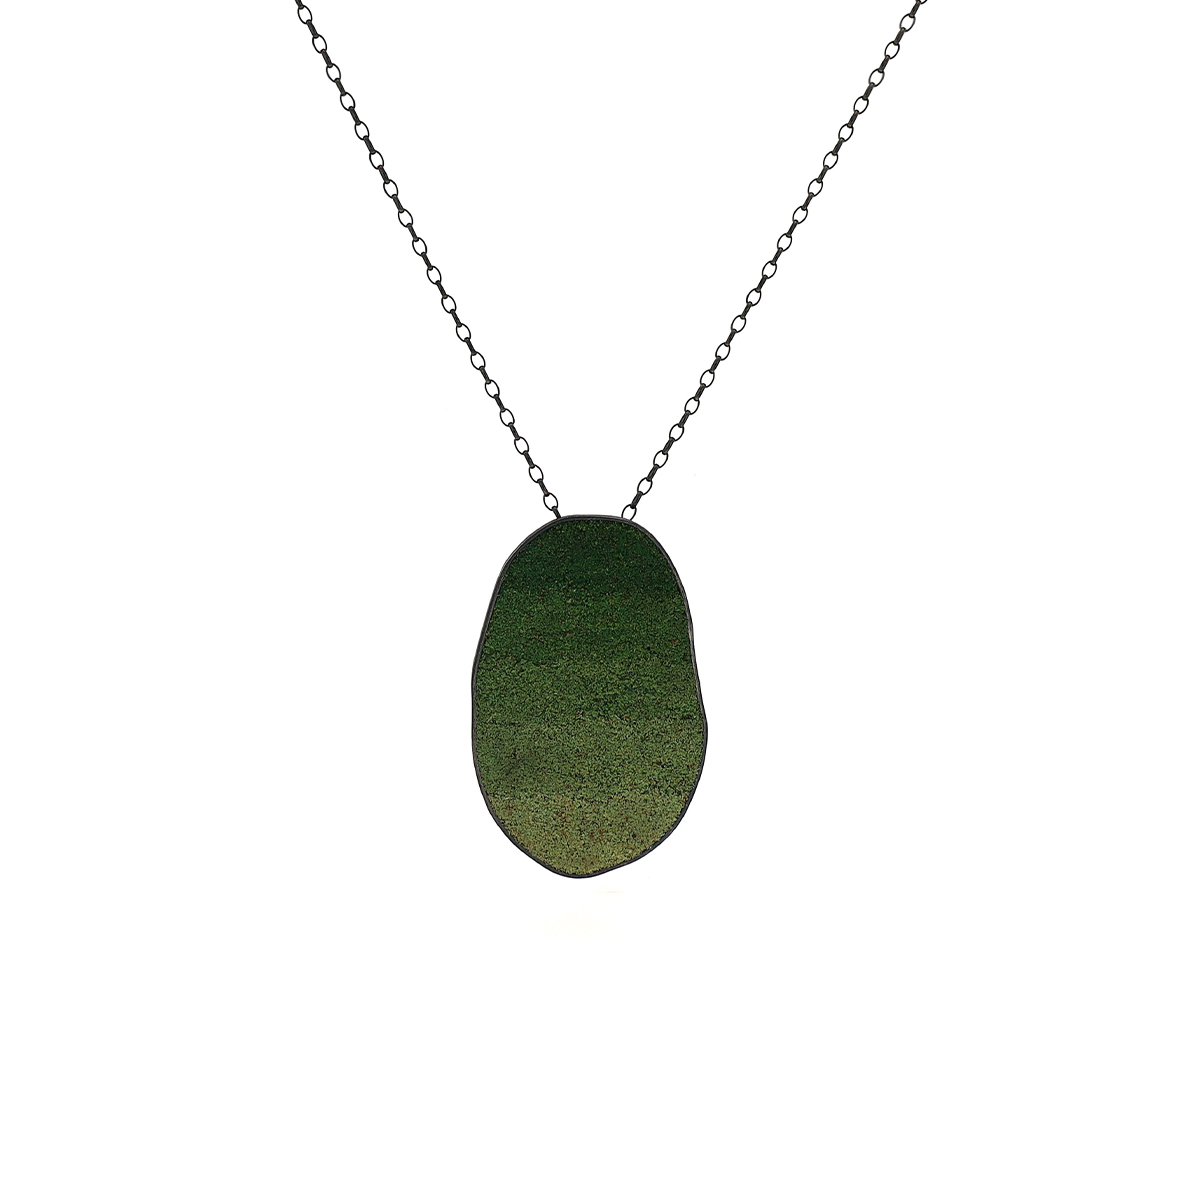 Oxidized Sterling Silver Green Ombre Sand Pendant with Chain